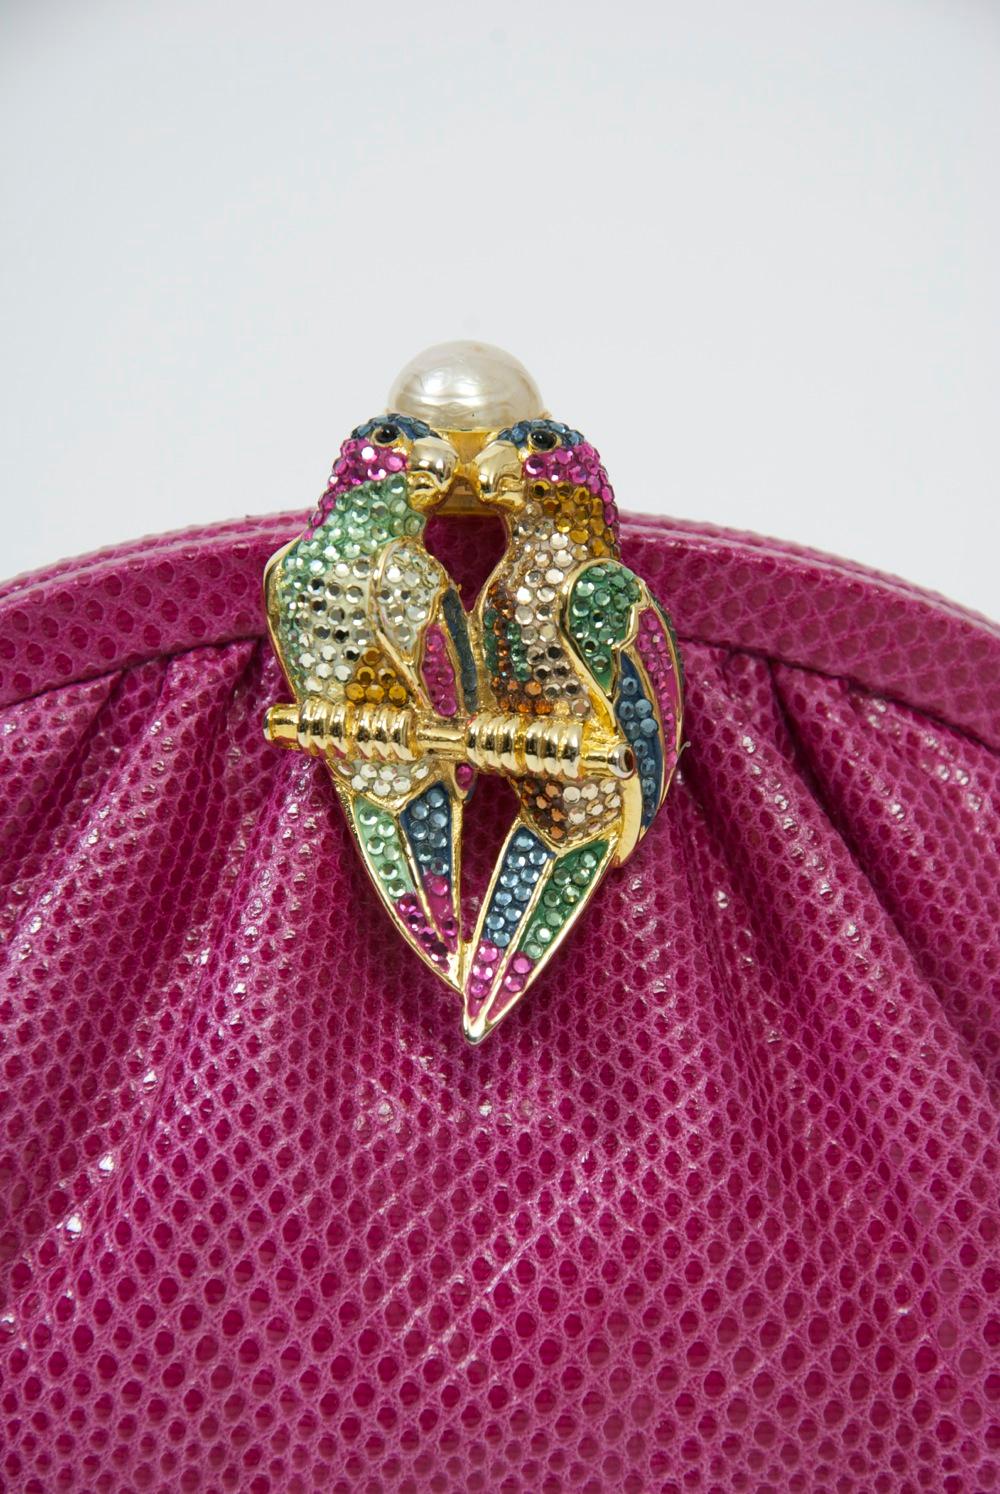 Judith Leiber convertible clutch/shoulder bag in a vibrant shade of pink karung featuring a double parrot clasp bejeweled with complementary crystals and topped with a large pearl. Matching fabric interior fitted with the usual Leiber accoutrments -